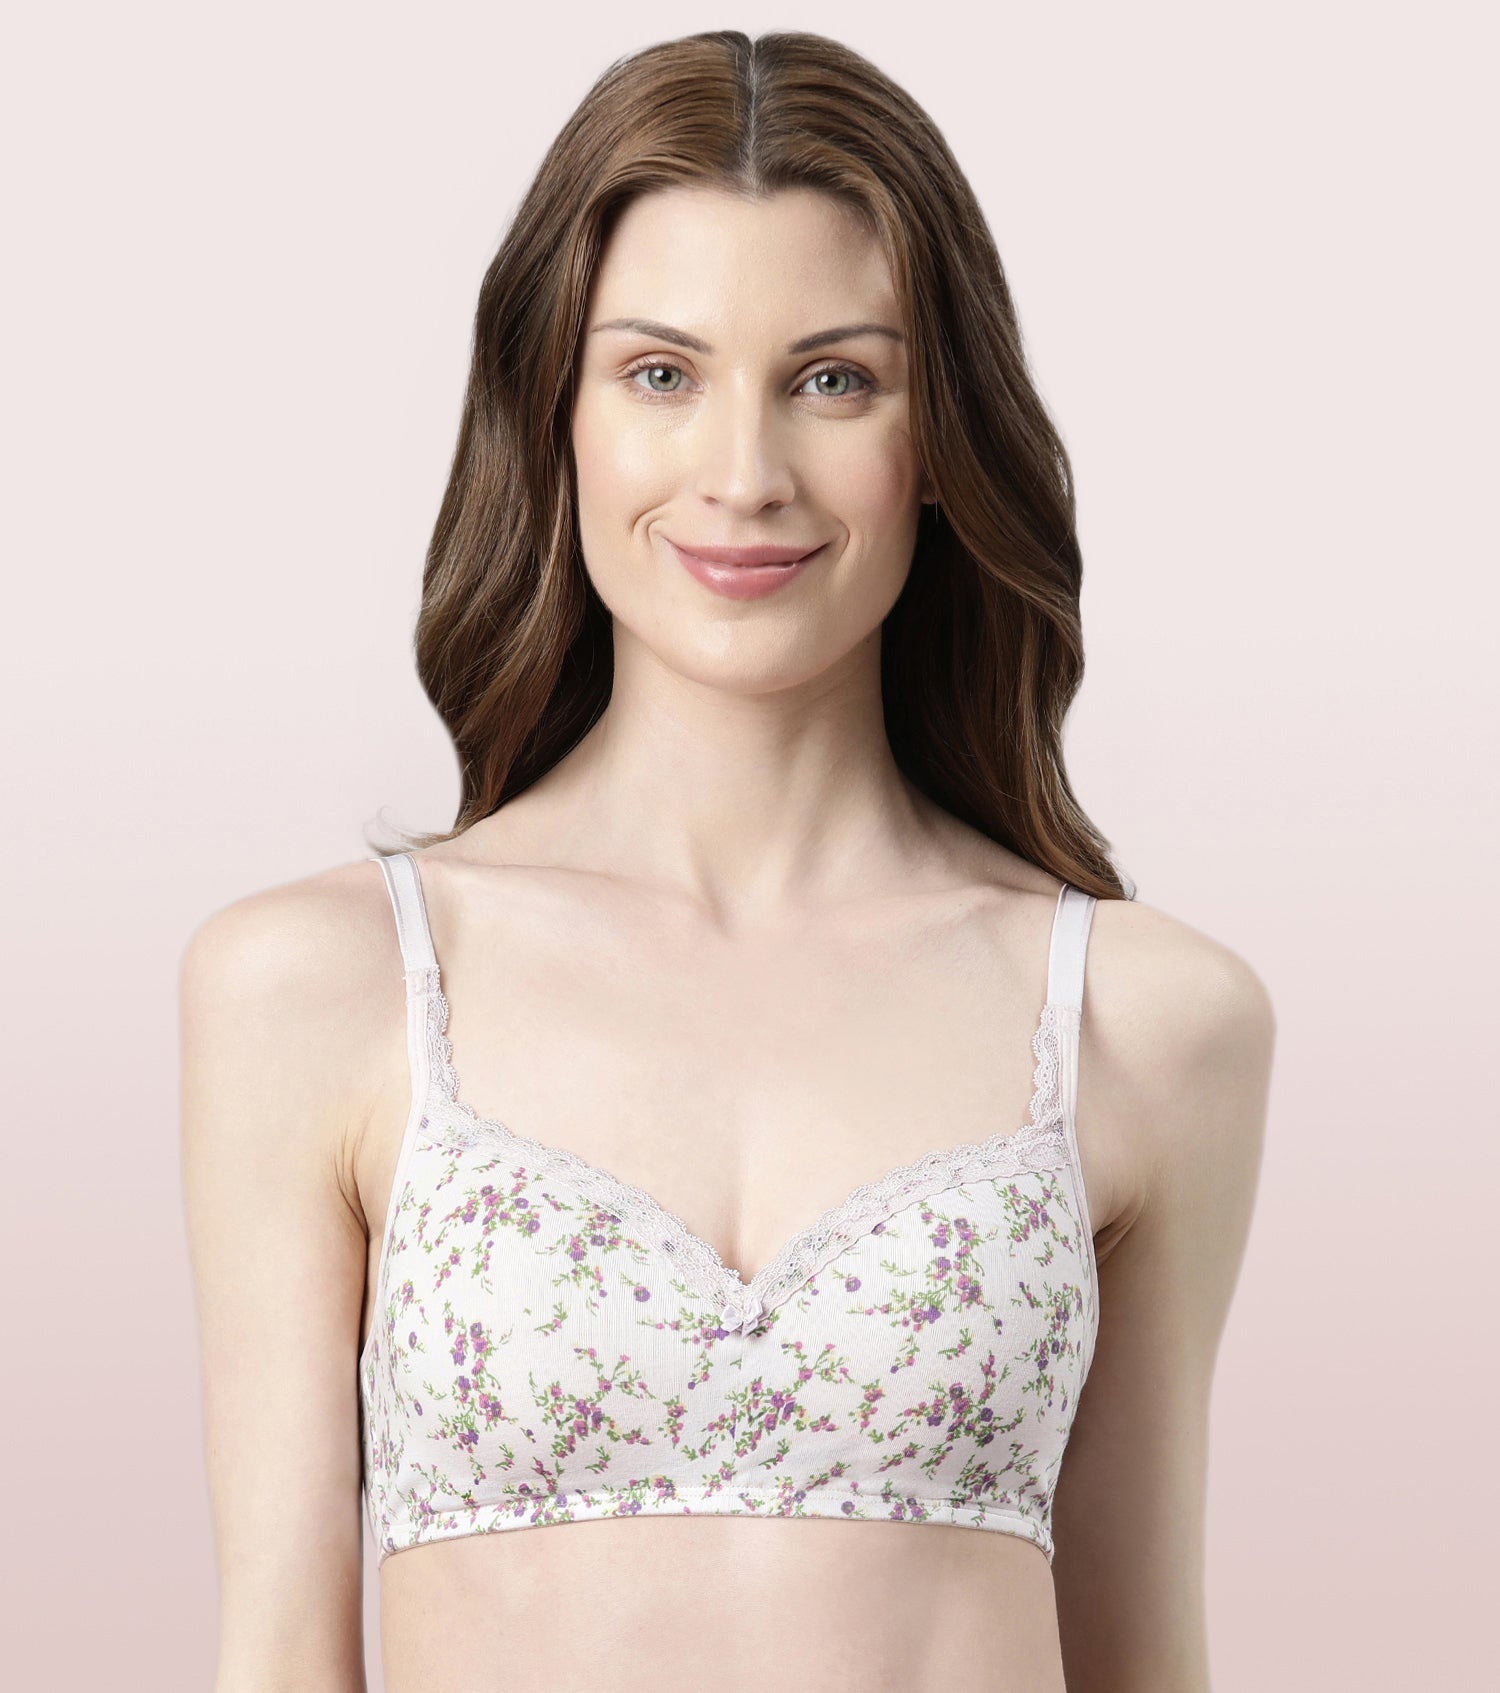 Enamor A017 Smoothening Wirefree Balconette T-Shirt Bra in Pune at best  price by Miracle Feel Lingeries And Nightwear Store - Justdial